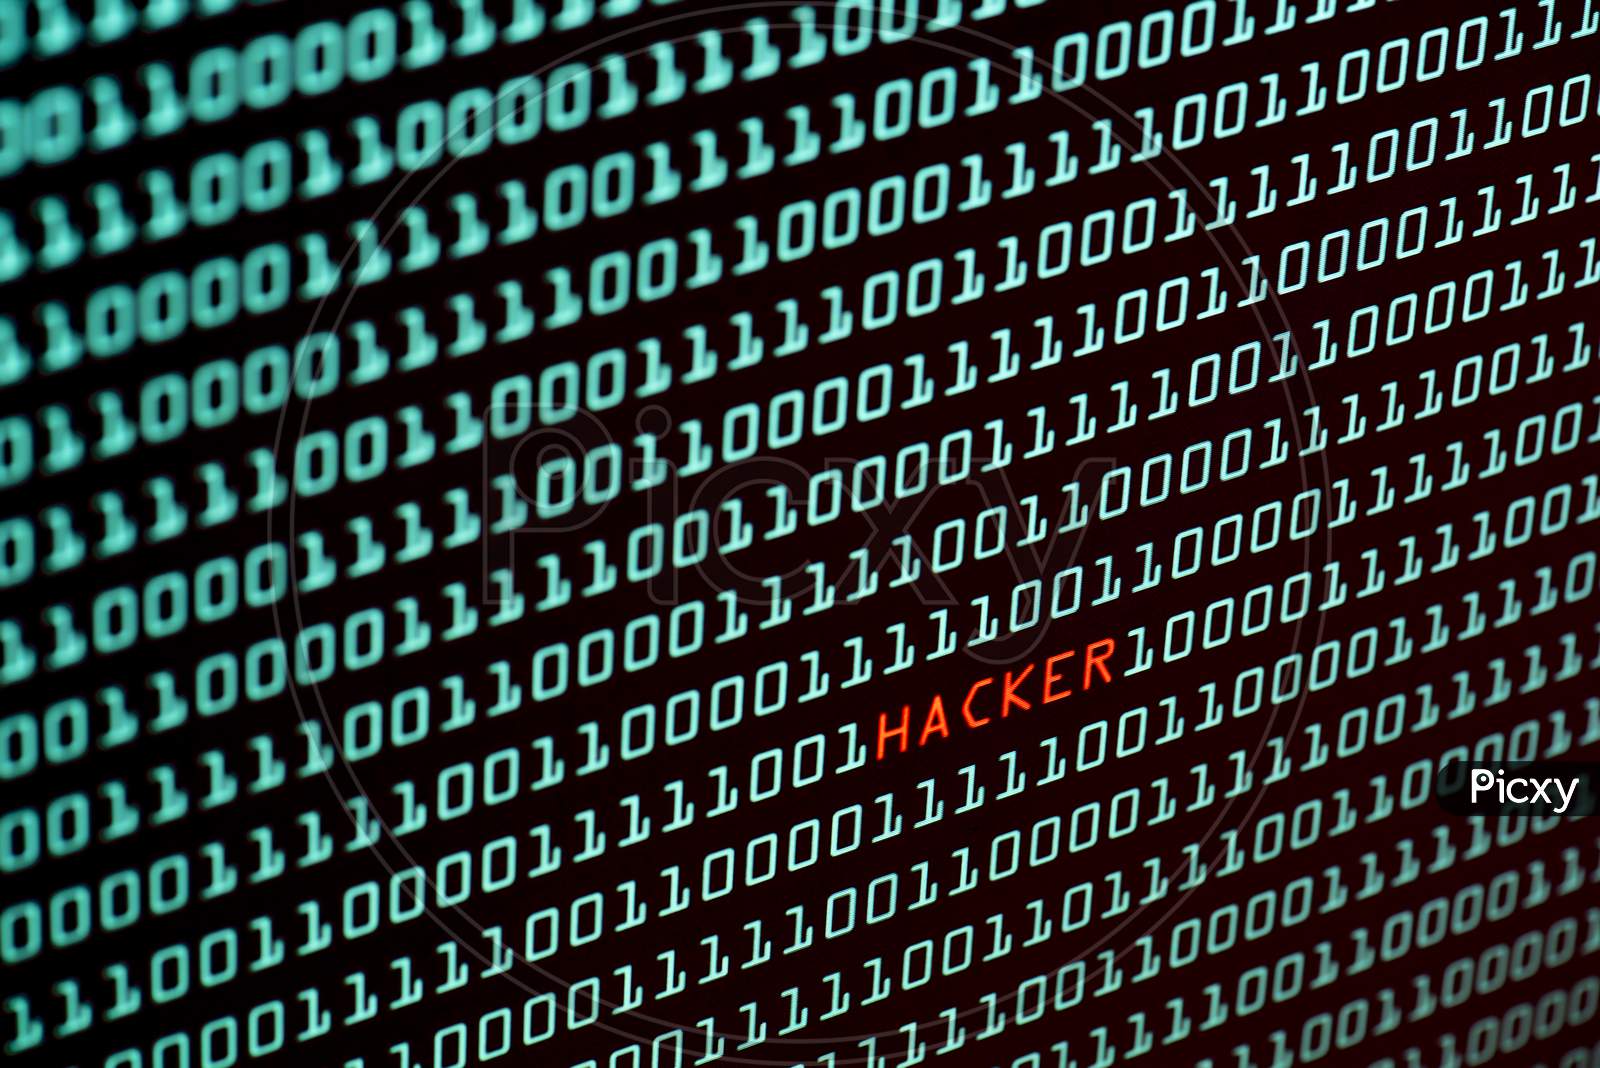 Hacker Text And Binary Code Concept From The Desktop Screen, Selective Focus